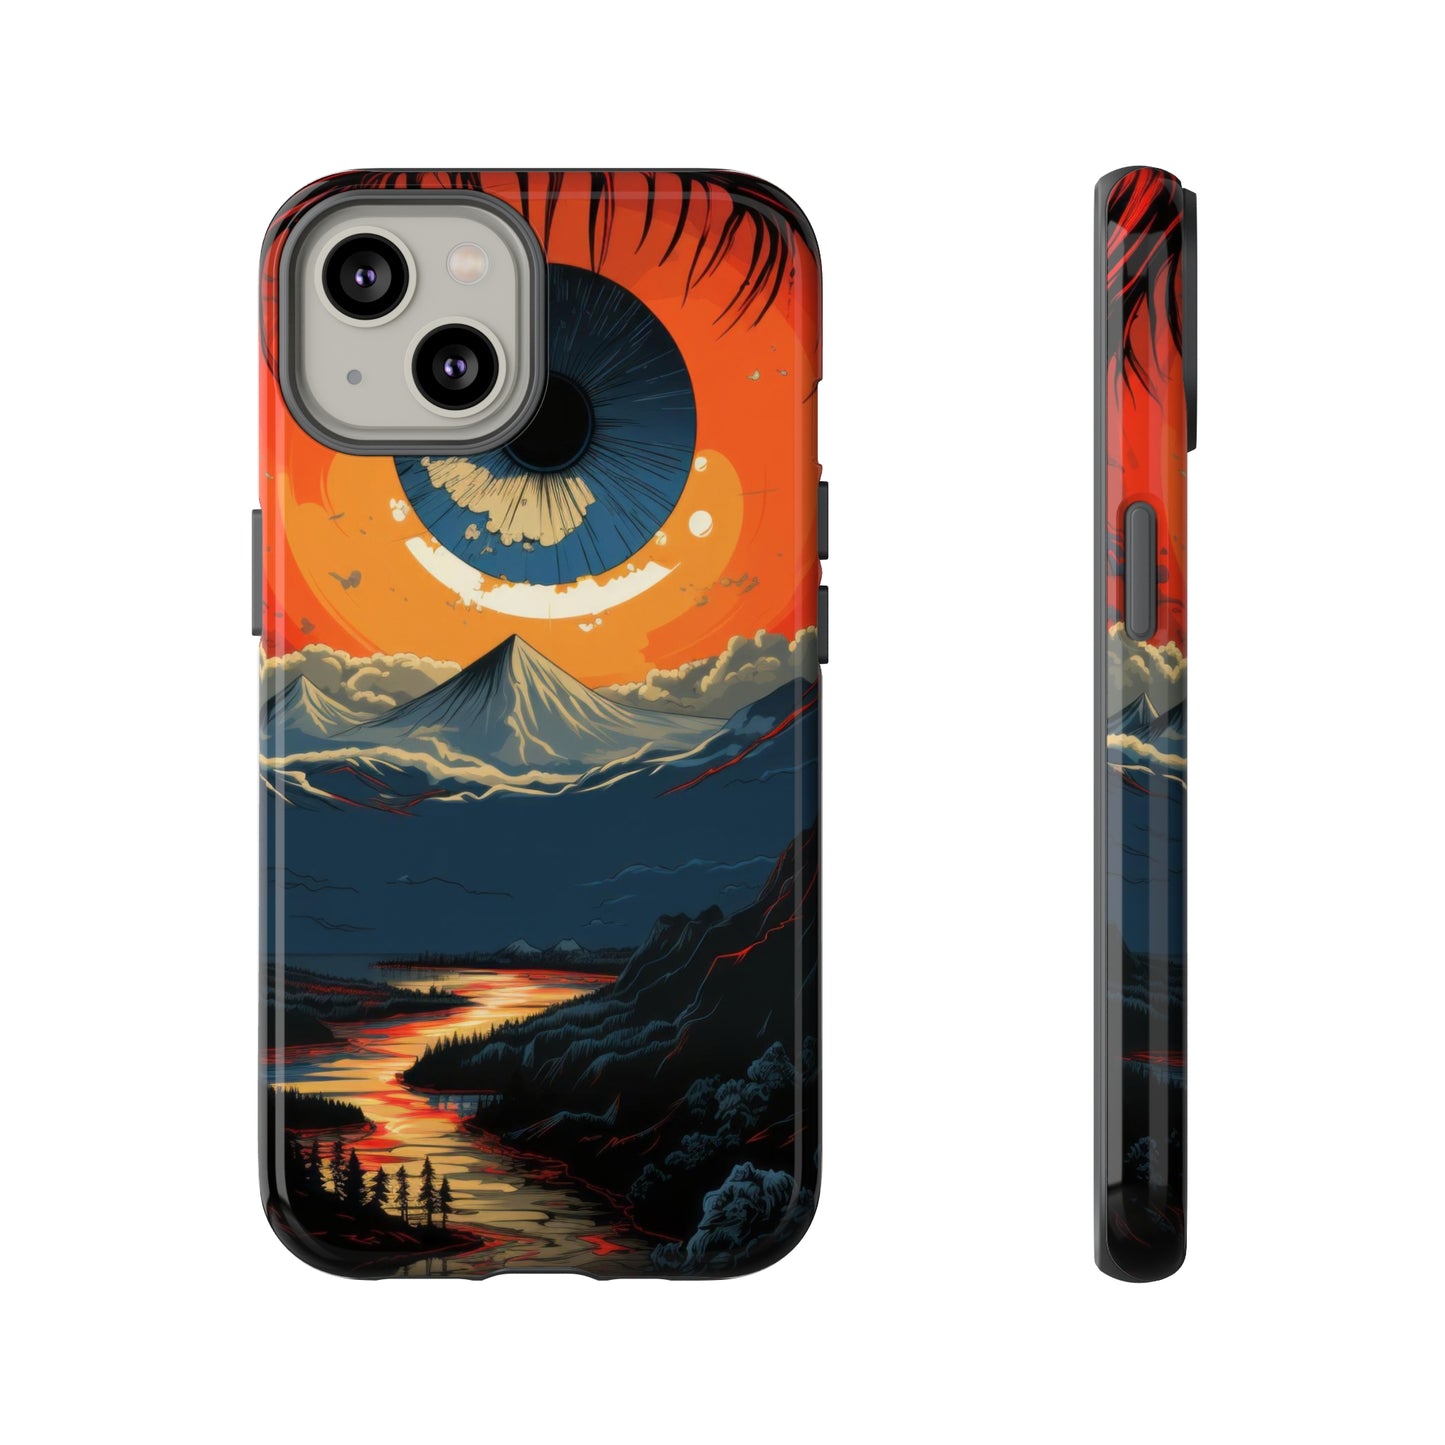 Eyescape: Surreal Blue Pupil with Mountain View Phone Case for iPhone, Samsung, Pixel